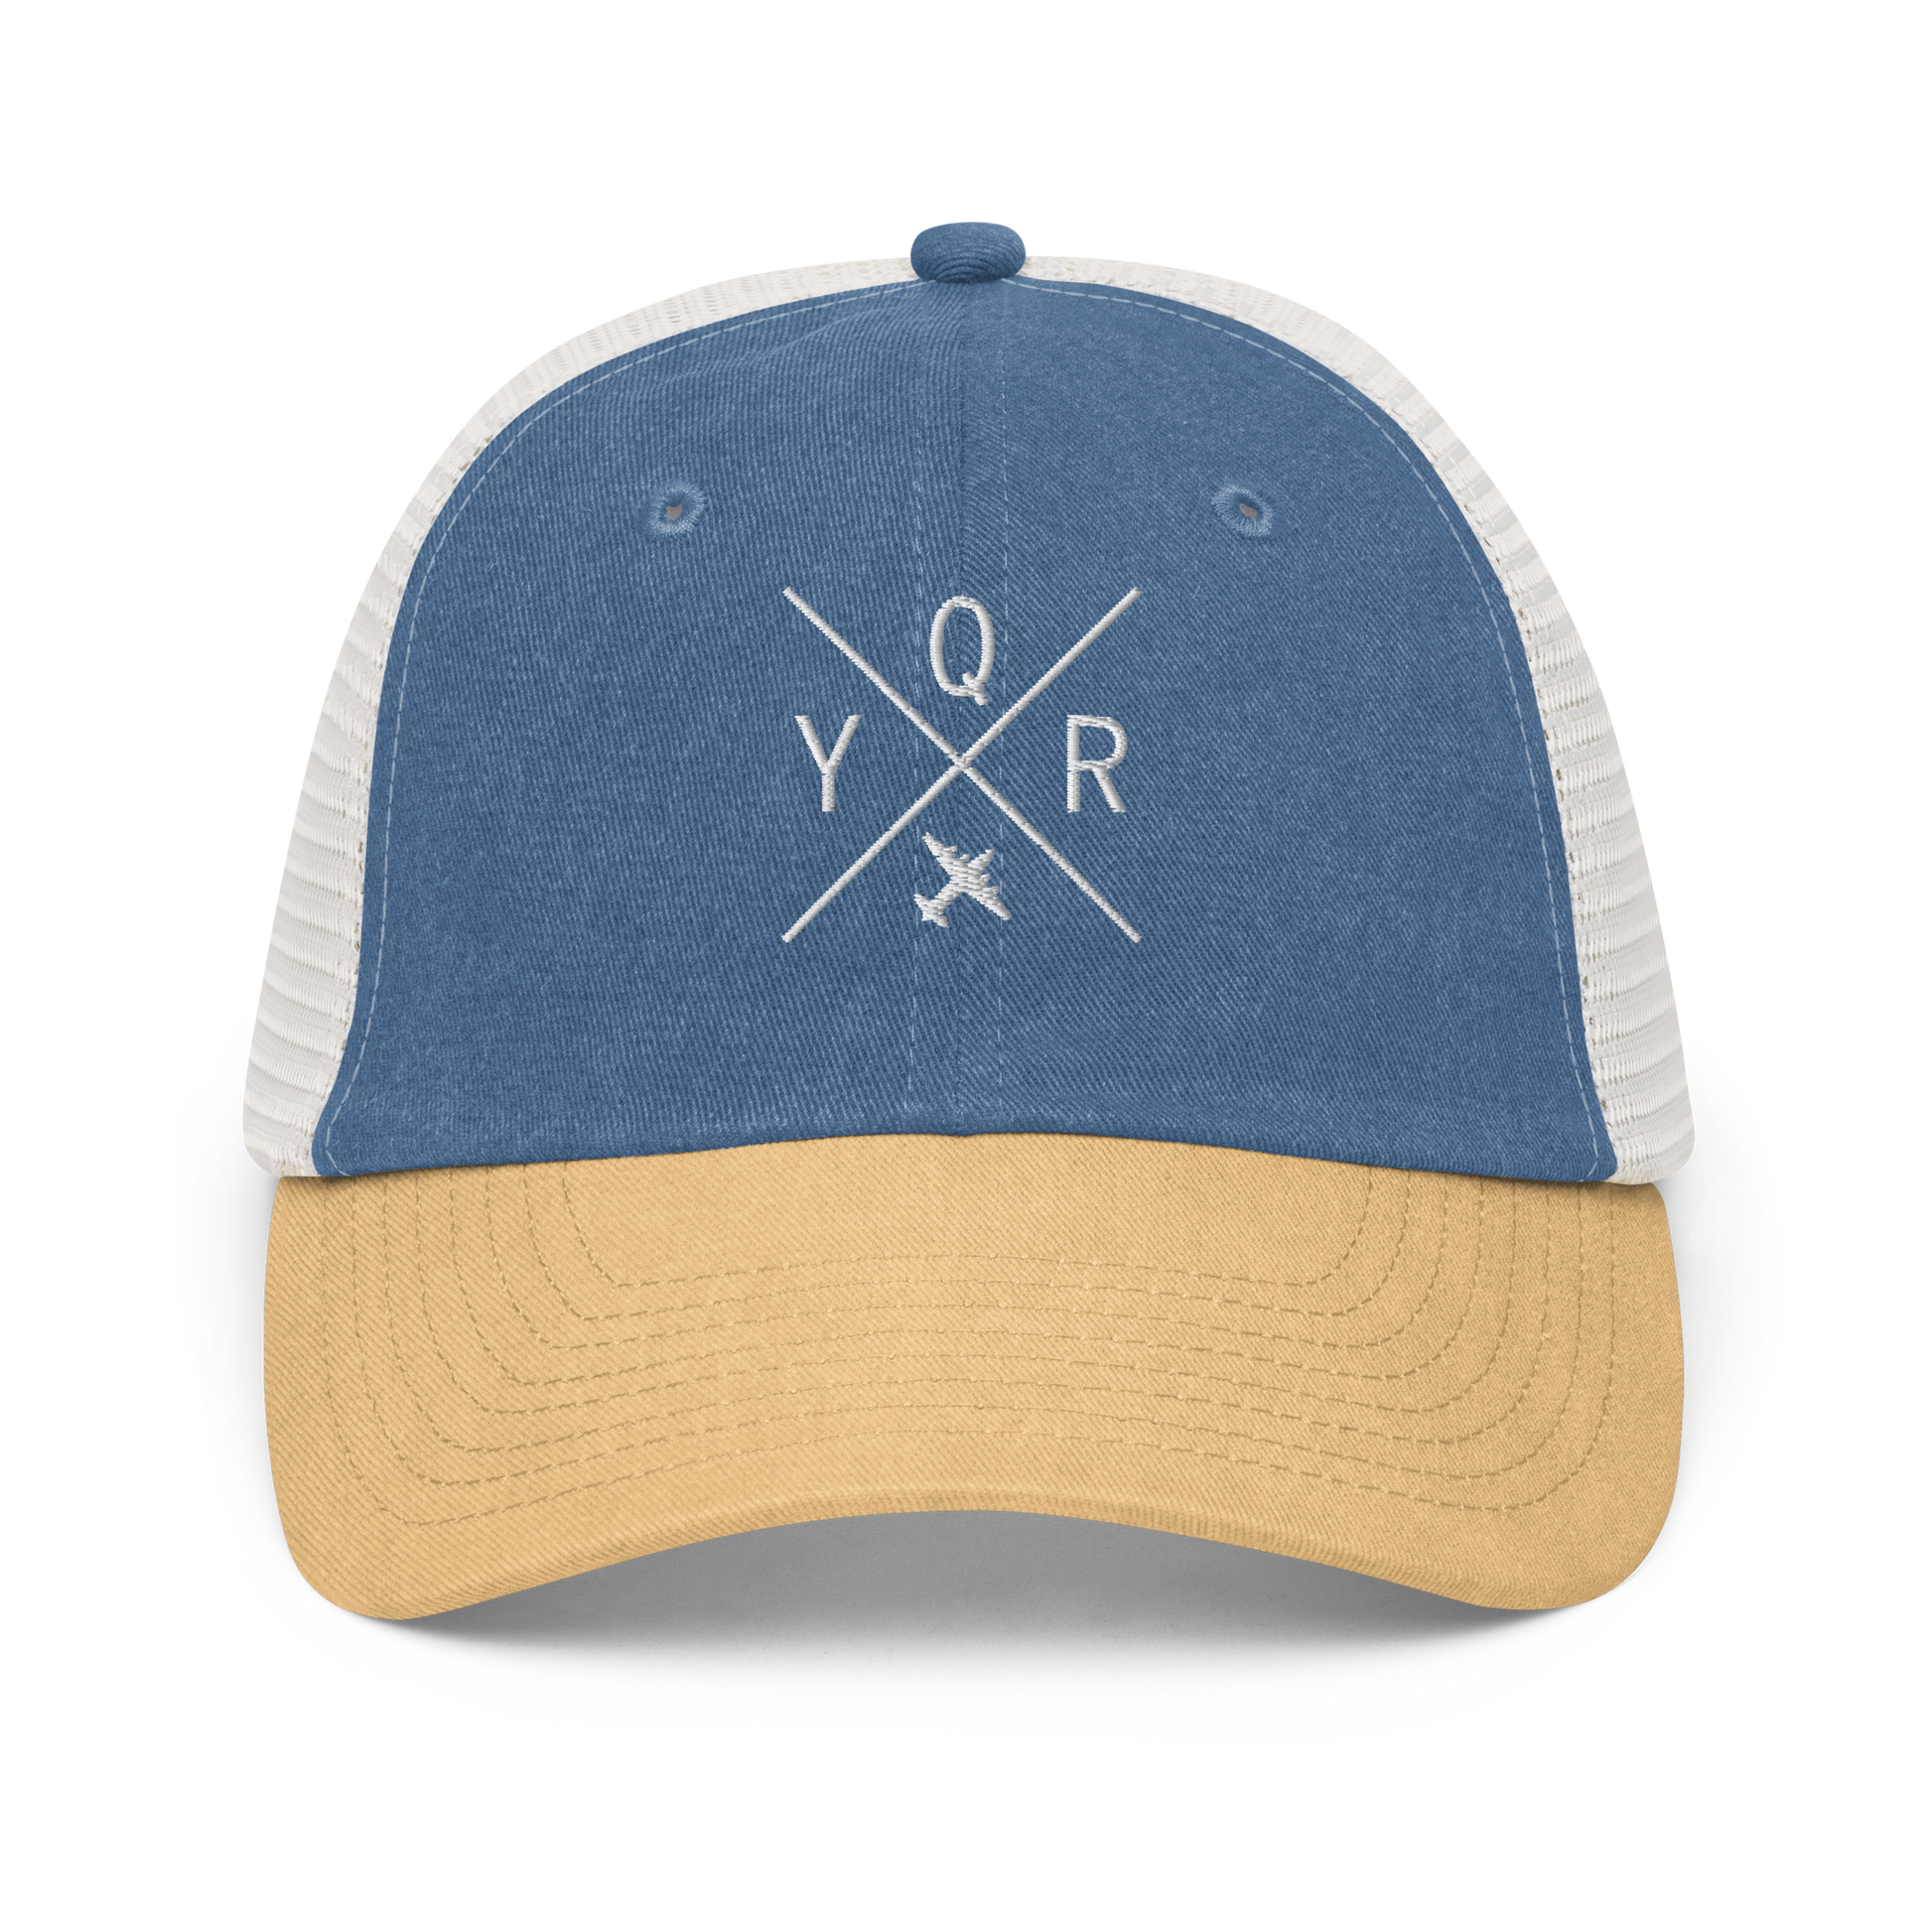 YHM Designs - YQR Regina Pigment-Dyed Trucker Cap - Crossed-X Design with Airport Code and Vintage Propliner - White Embroidery - Image 01